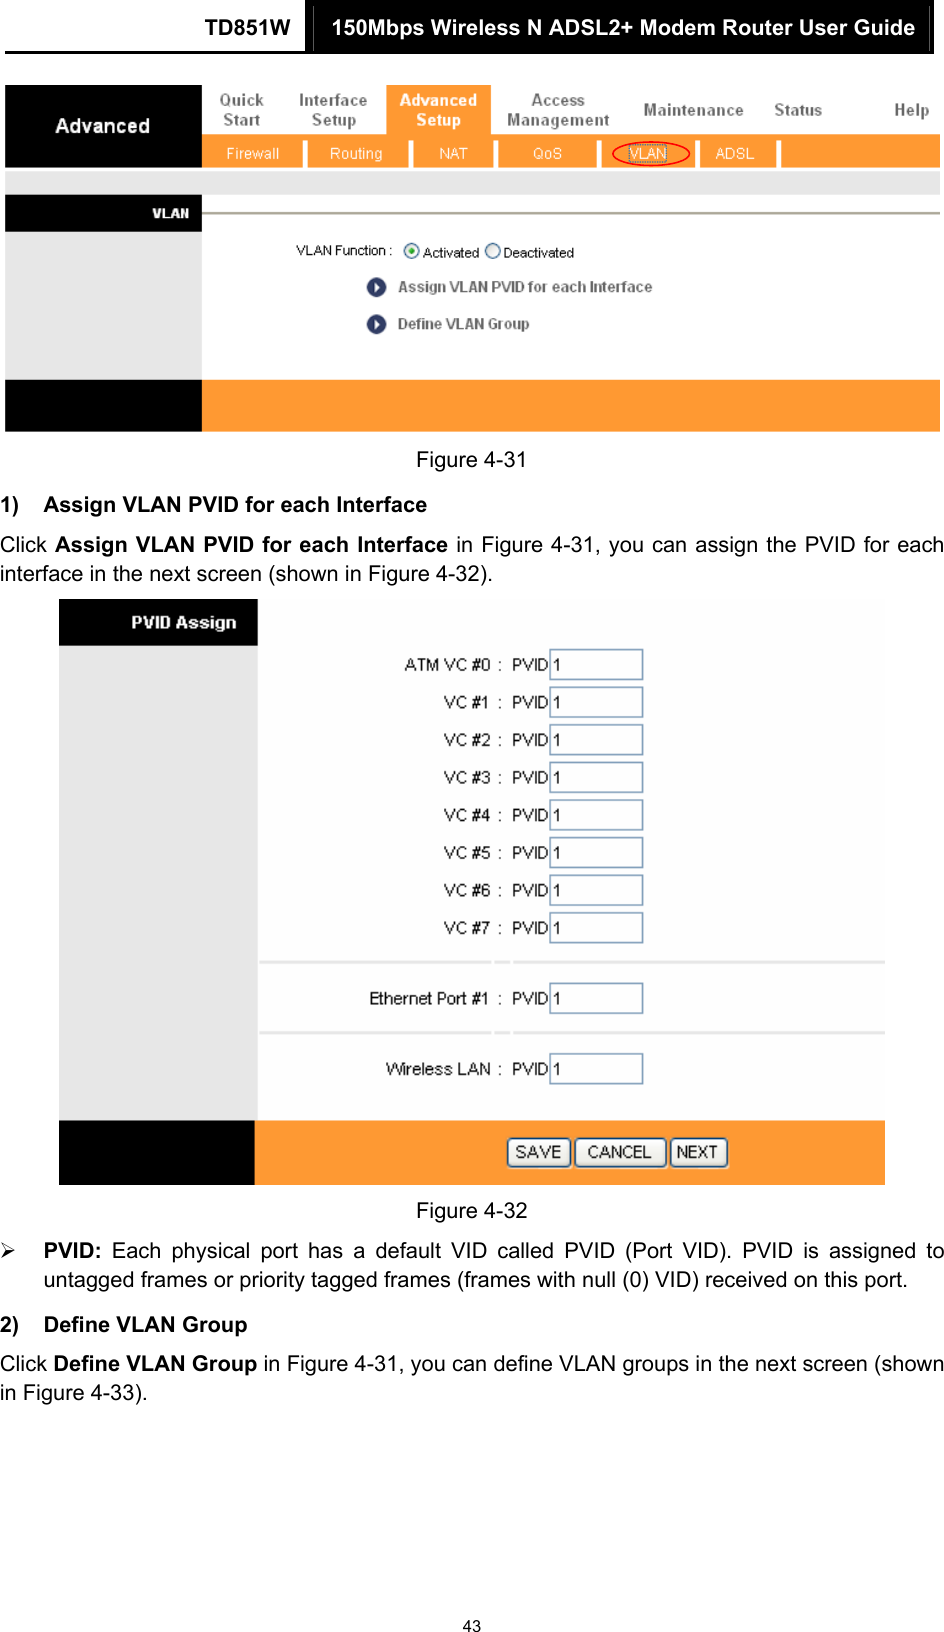 TD851W  150Mbps Wireless N ADSL2+ Modem Router User Guide 43  Figure 4-31 1)  Assign VLAN PVID for each Interface Click Assign VLAN PVID for each Interface in Figure 4-31, you can assign the PVID for each interface in the next screen (shown in Figure 4-32).  Figure 4-32 ¾ PVID: Each physical port has a default VID called PVID (Port VID). PVID is assigned to untagged frames or priority tagged frames (frames with null (0) VID) received on this port. 2)  Define VLAN Group   Click Define VLAN Group in Figure 4-31, you can define VLAN groups in the next screen (shown in Figure 4-33). 